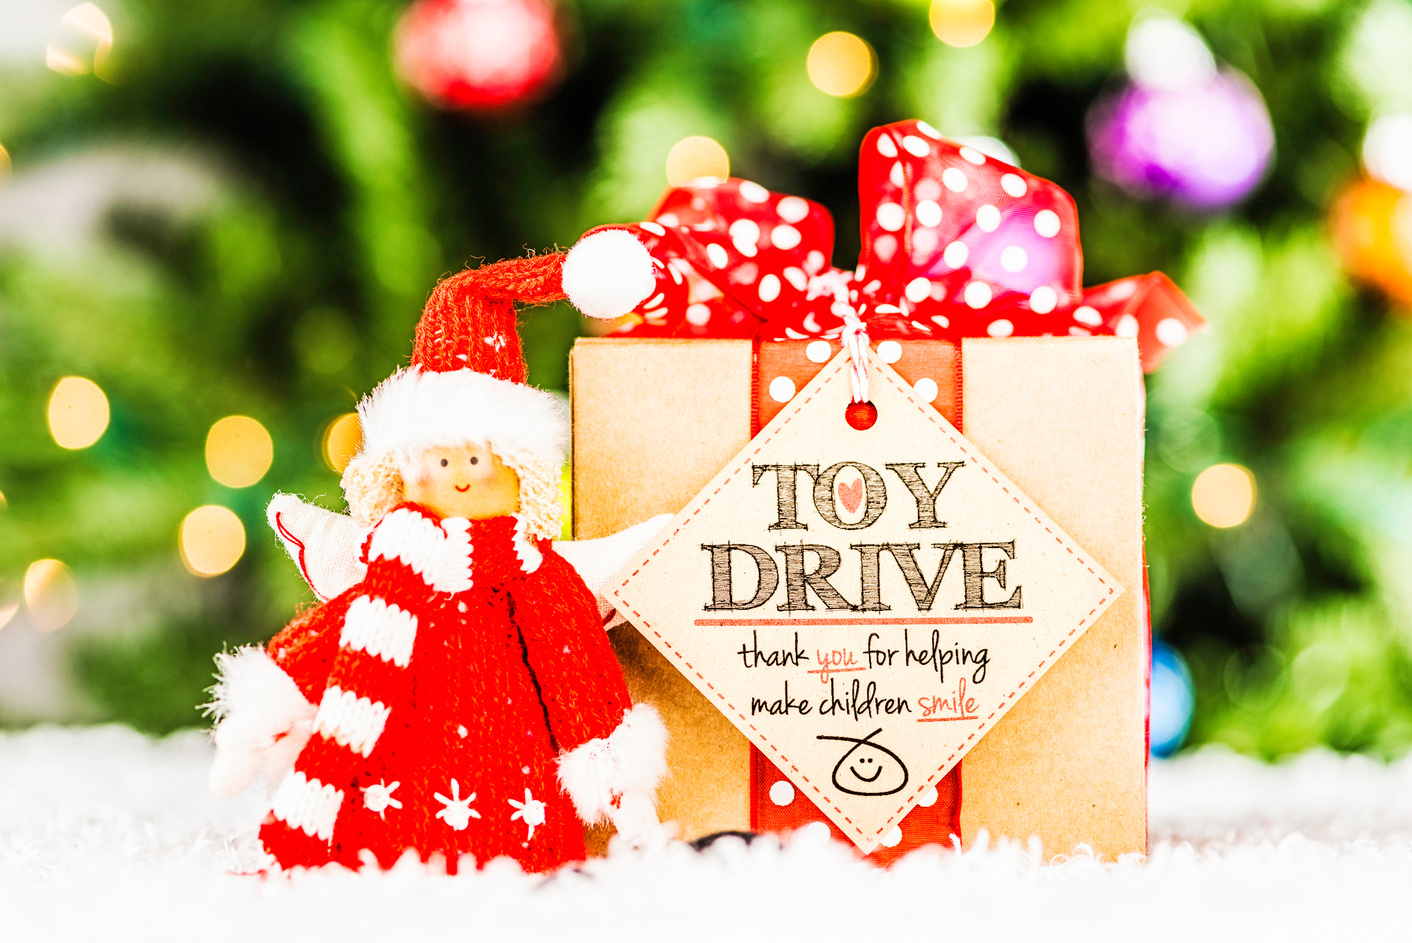 Toy Drive Promotion